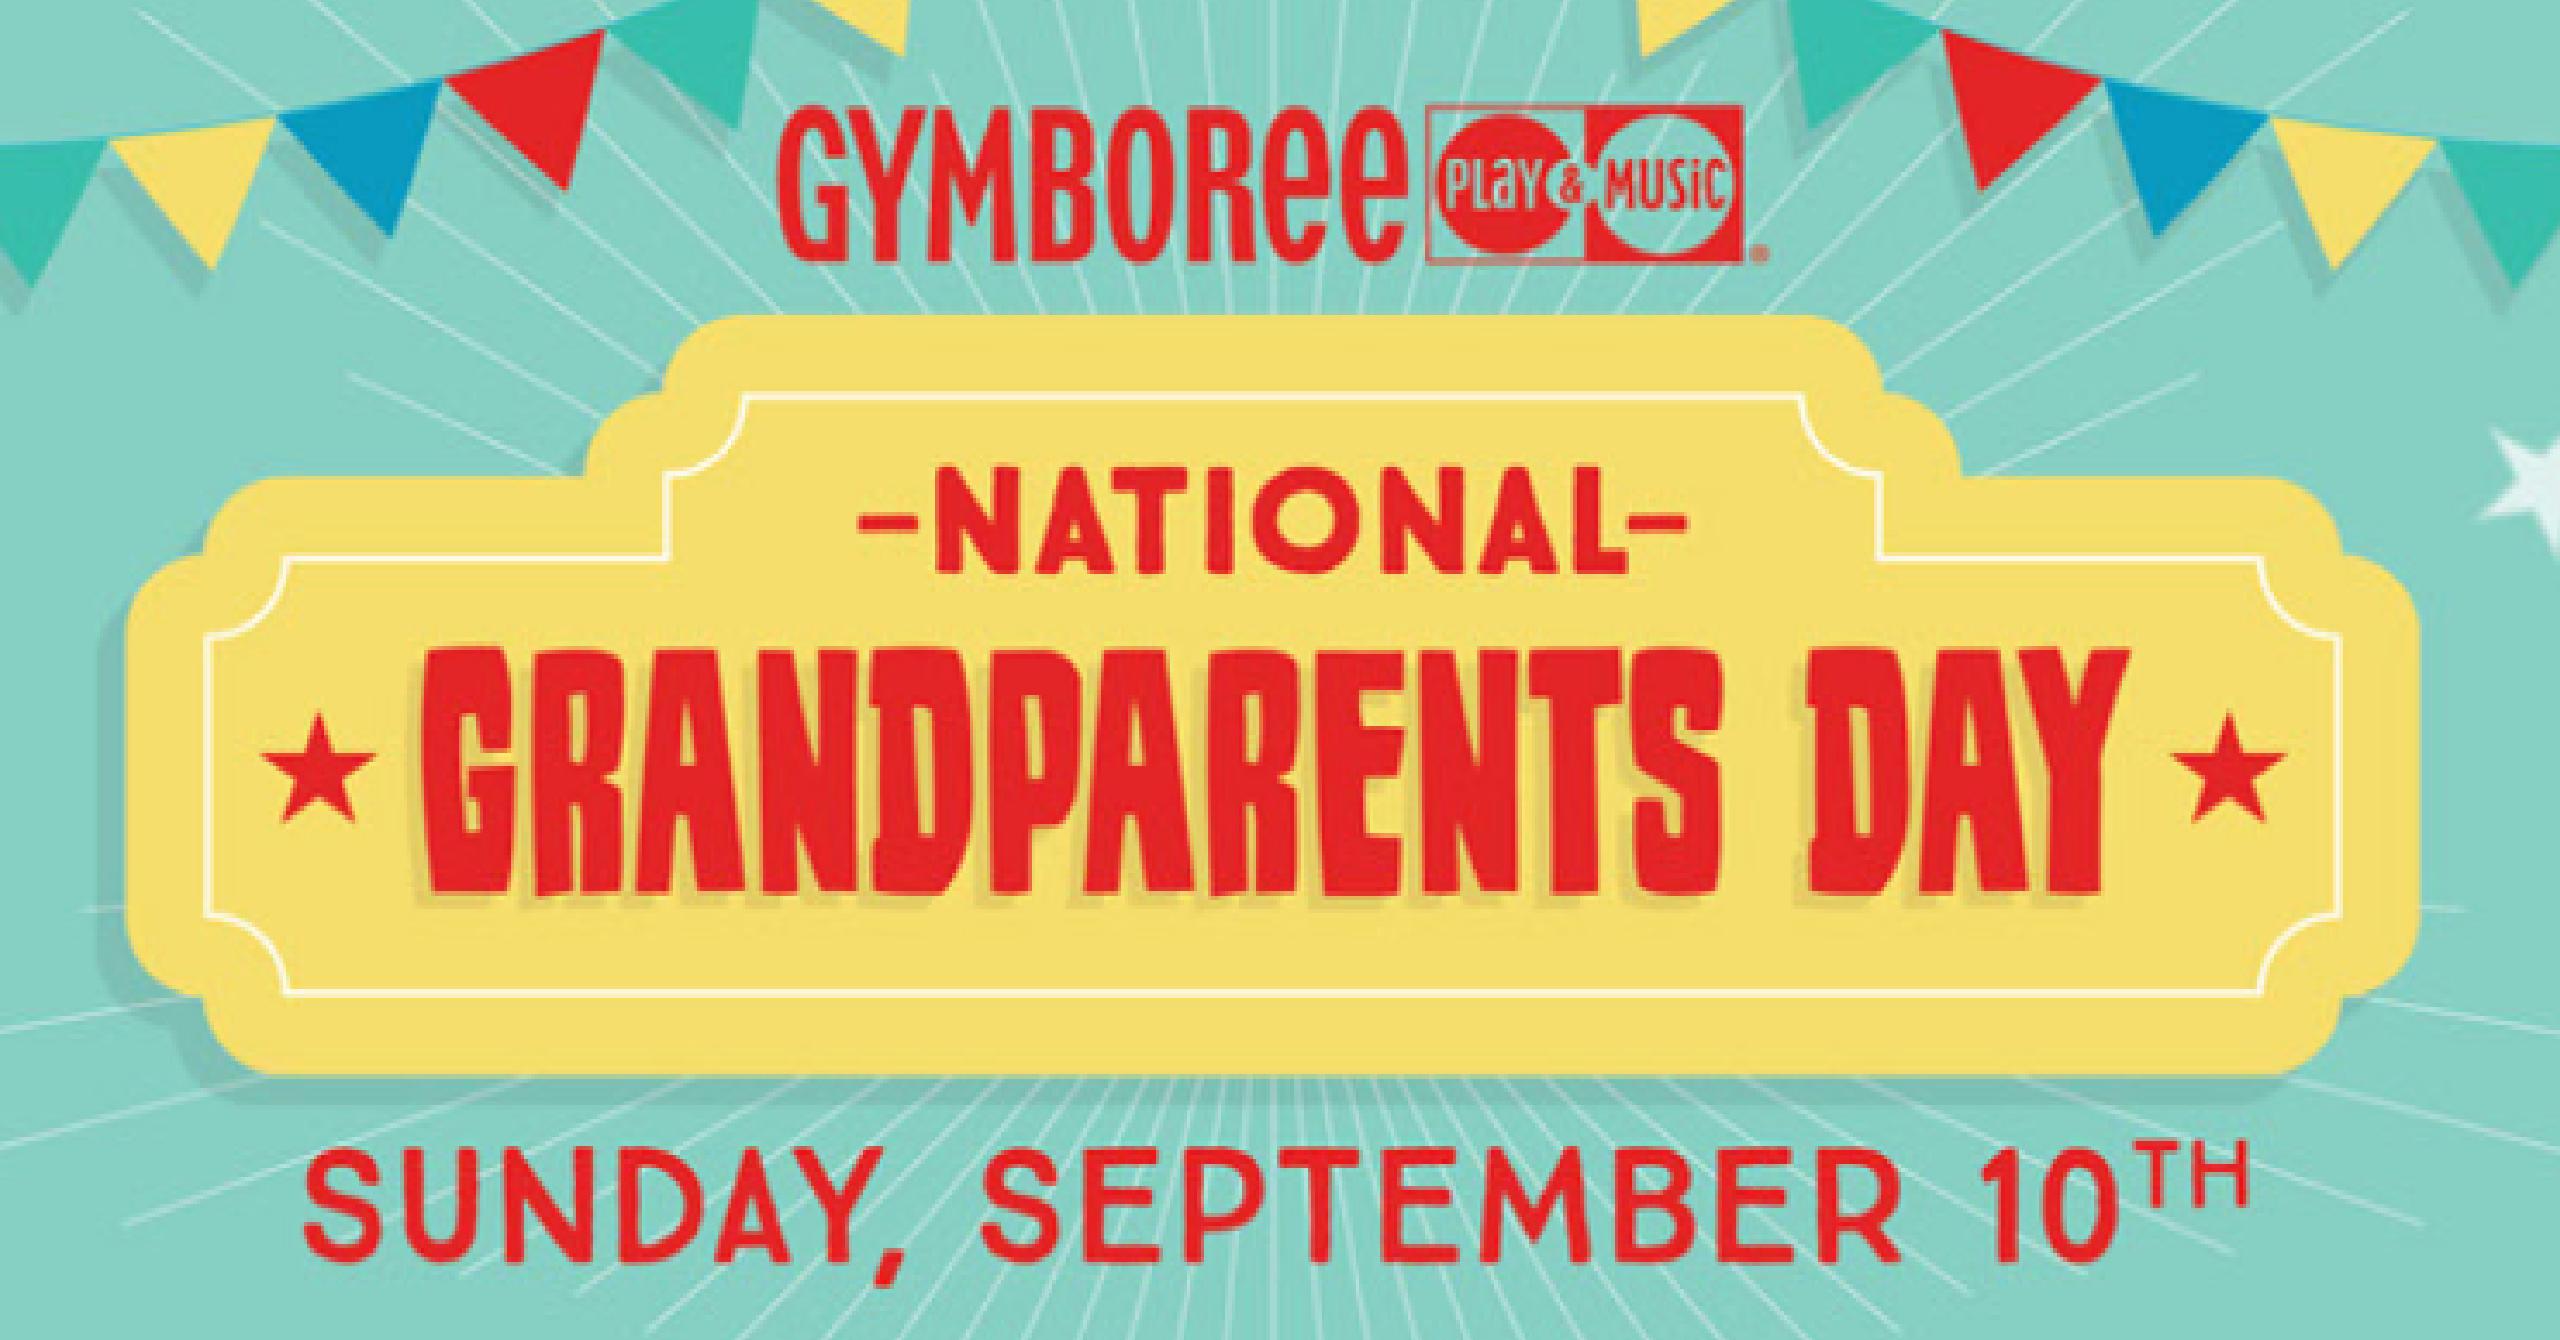 FREE Grandparents Day Carnival of Fun Event at Gymboree!